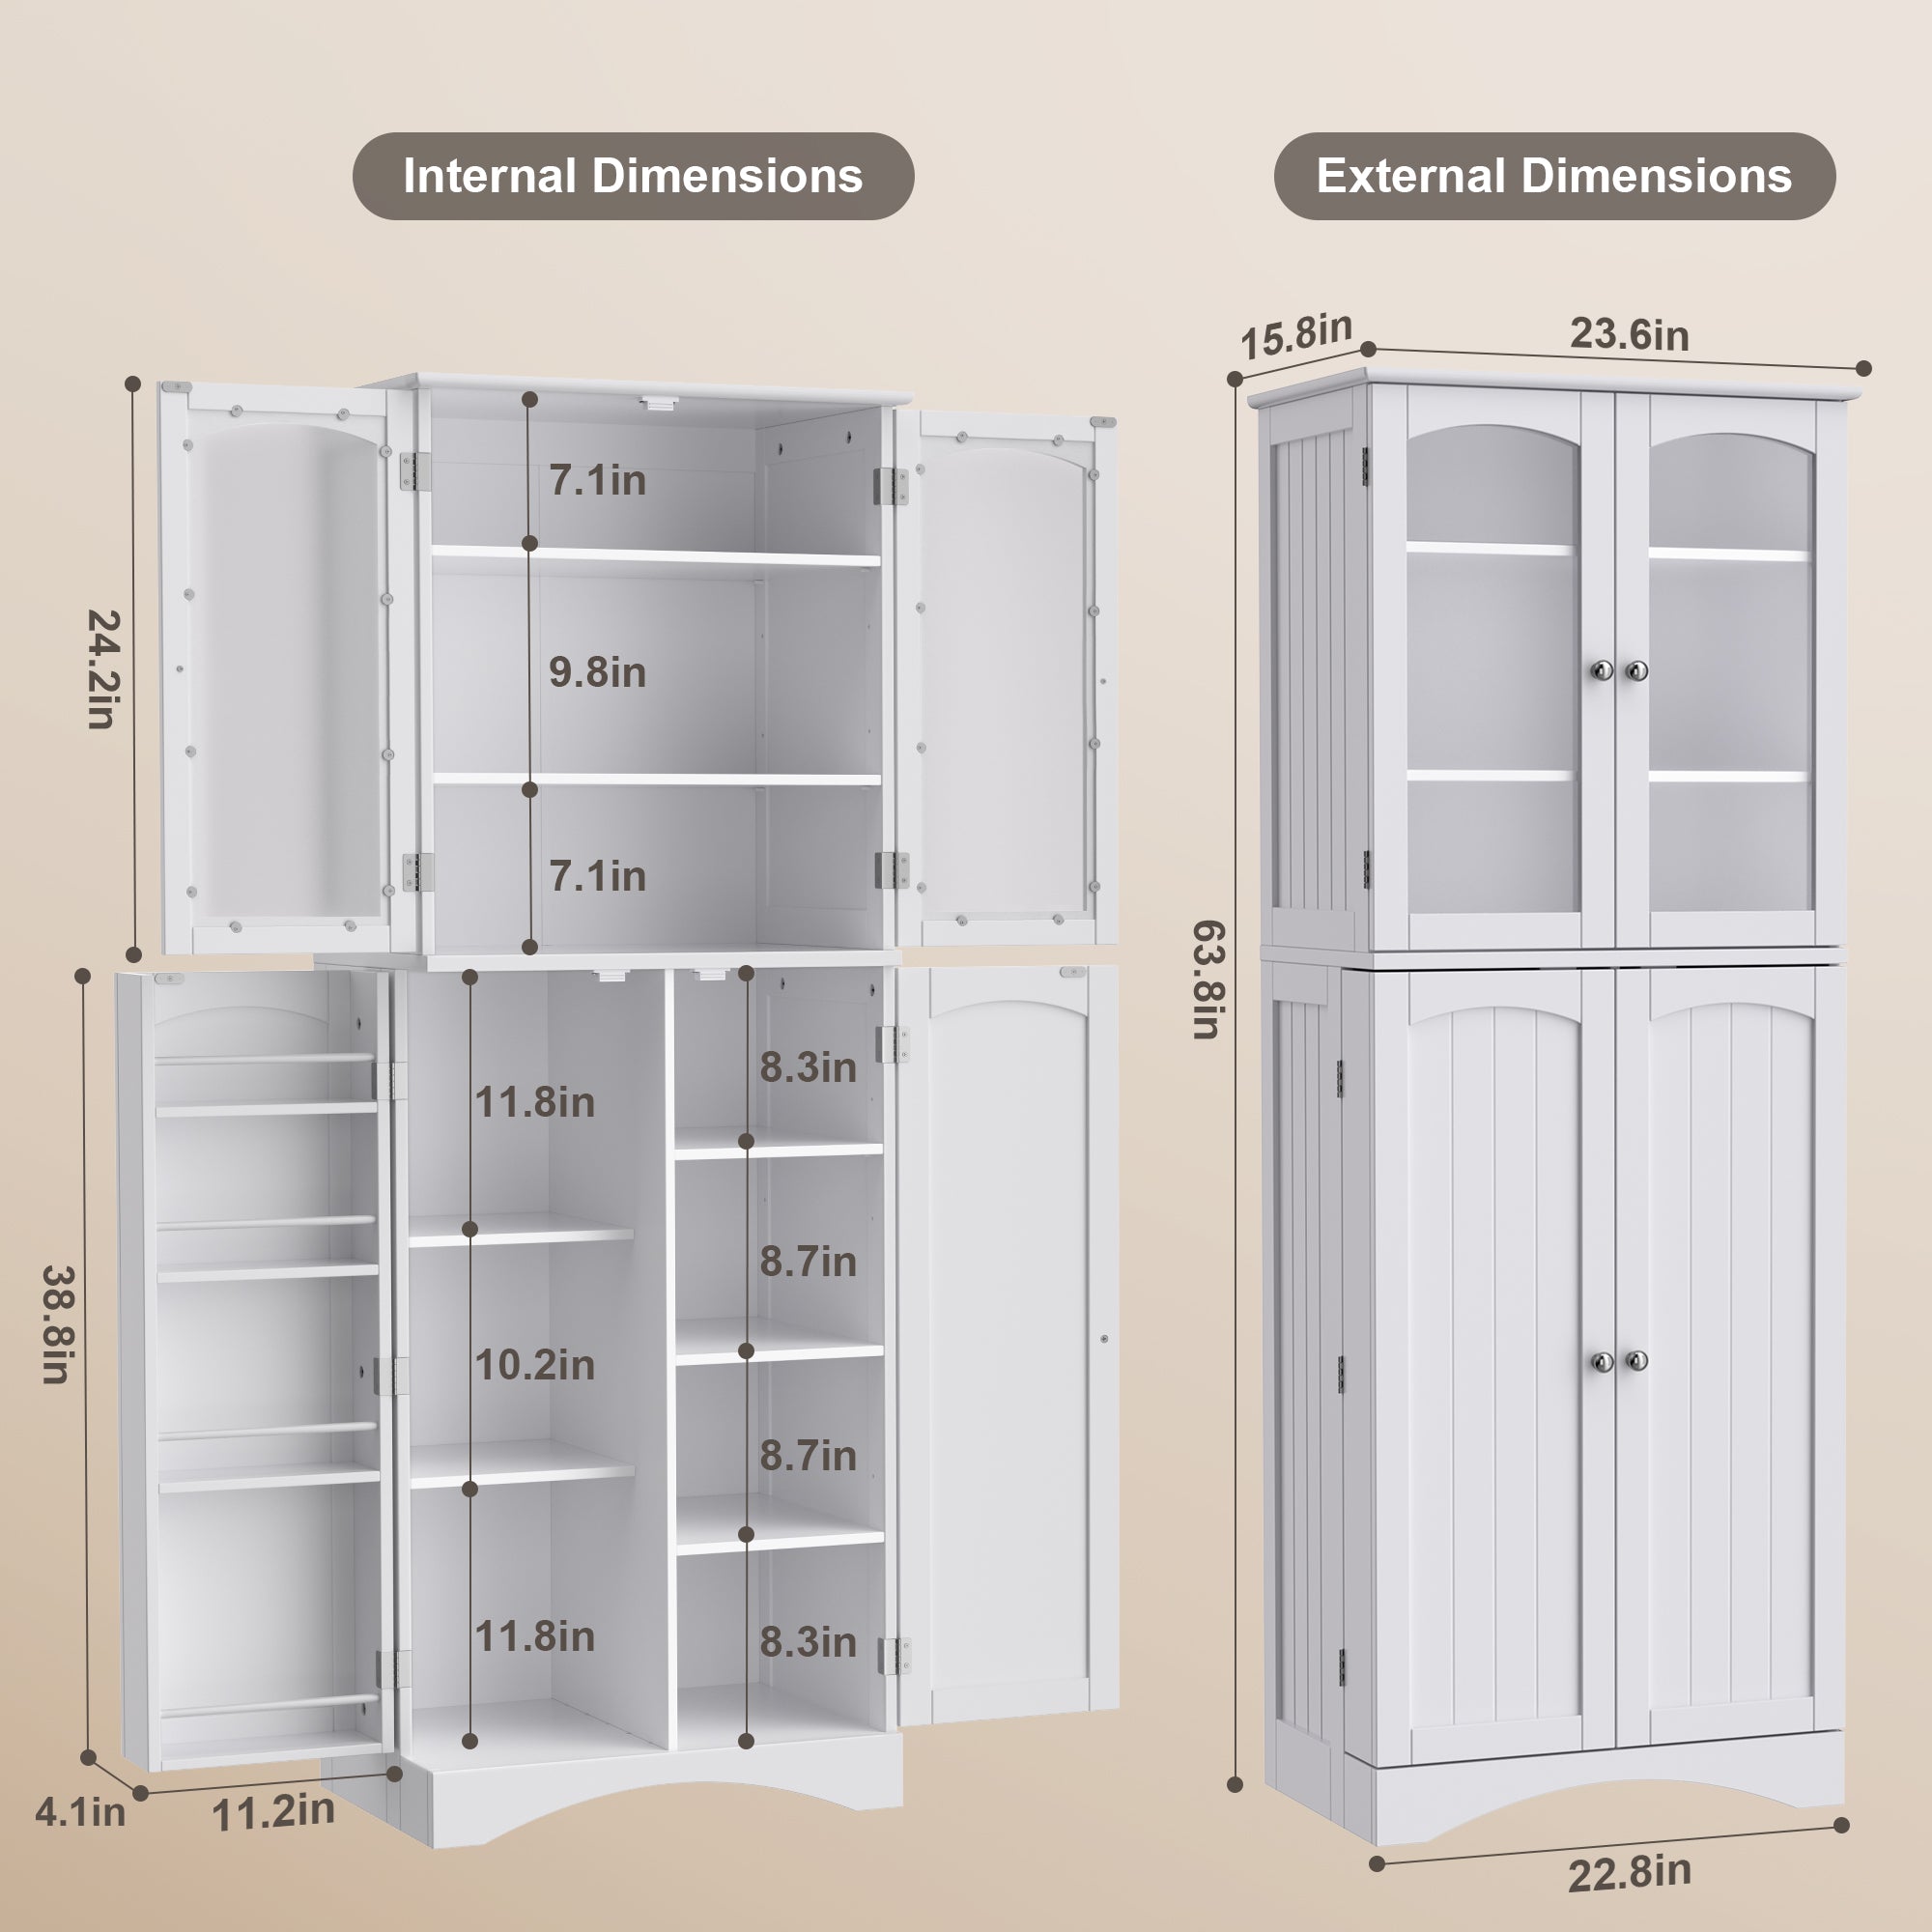 Gizoon AP31 64" Freestanding Kitchen Pantry Cabinet with Glass Doors and Adjustable Shelves